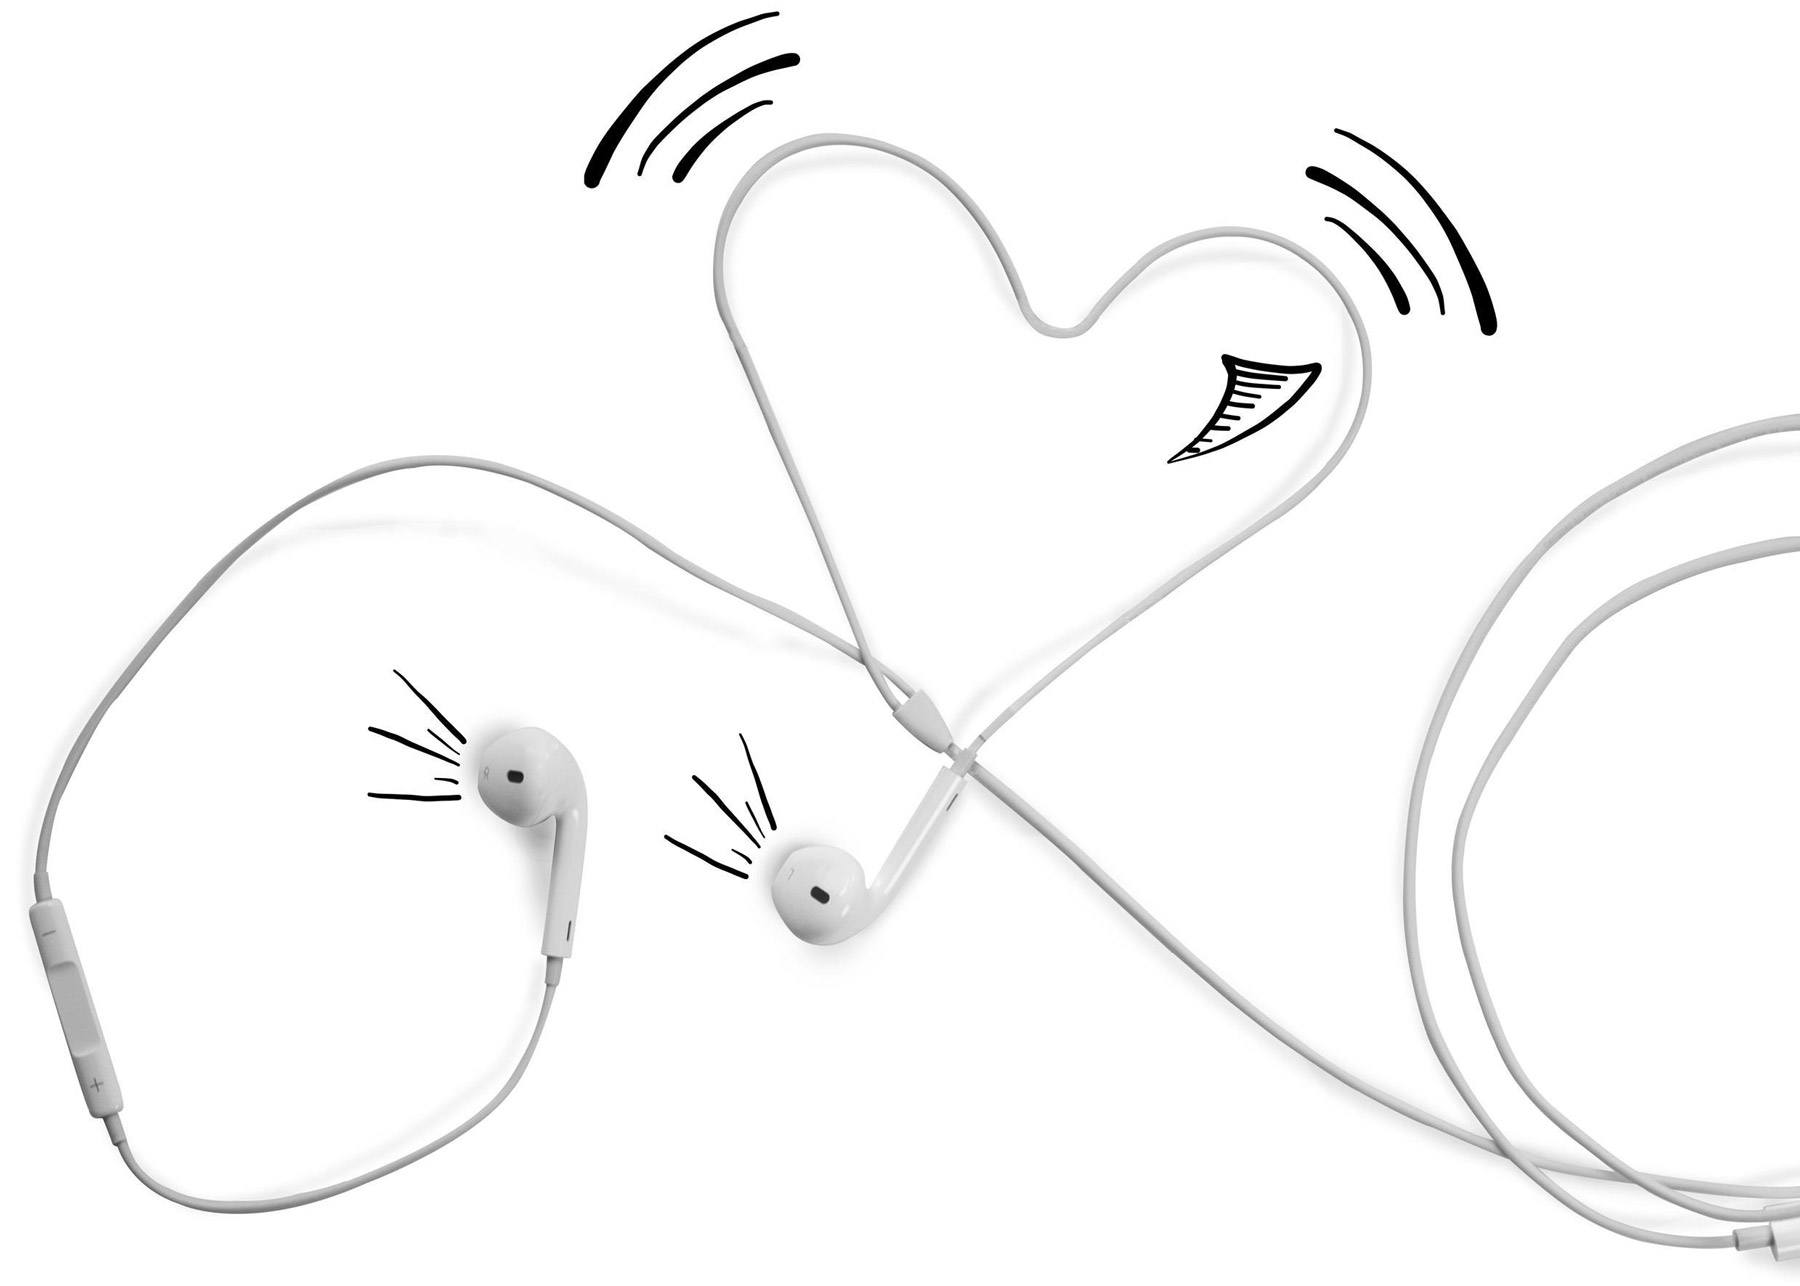 White earbuds made into the shape of a heart